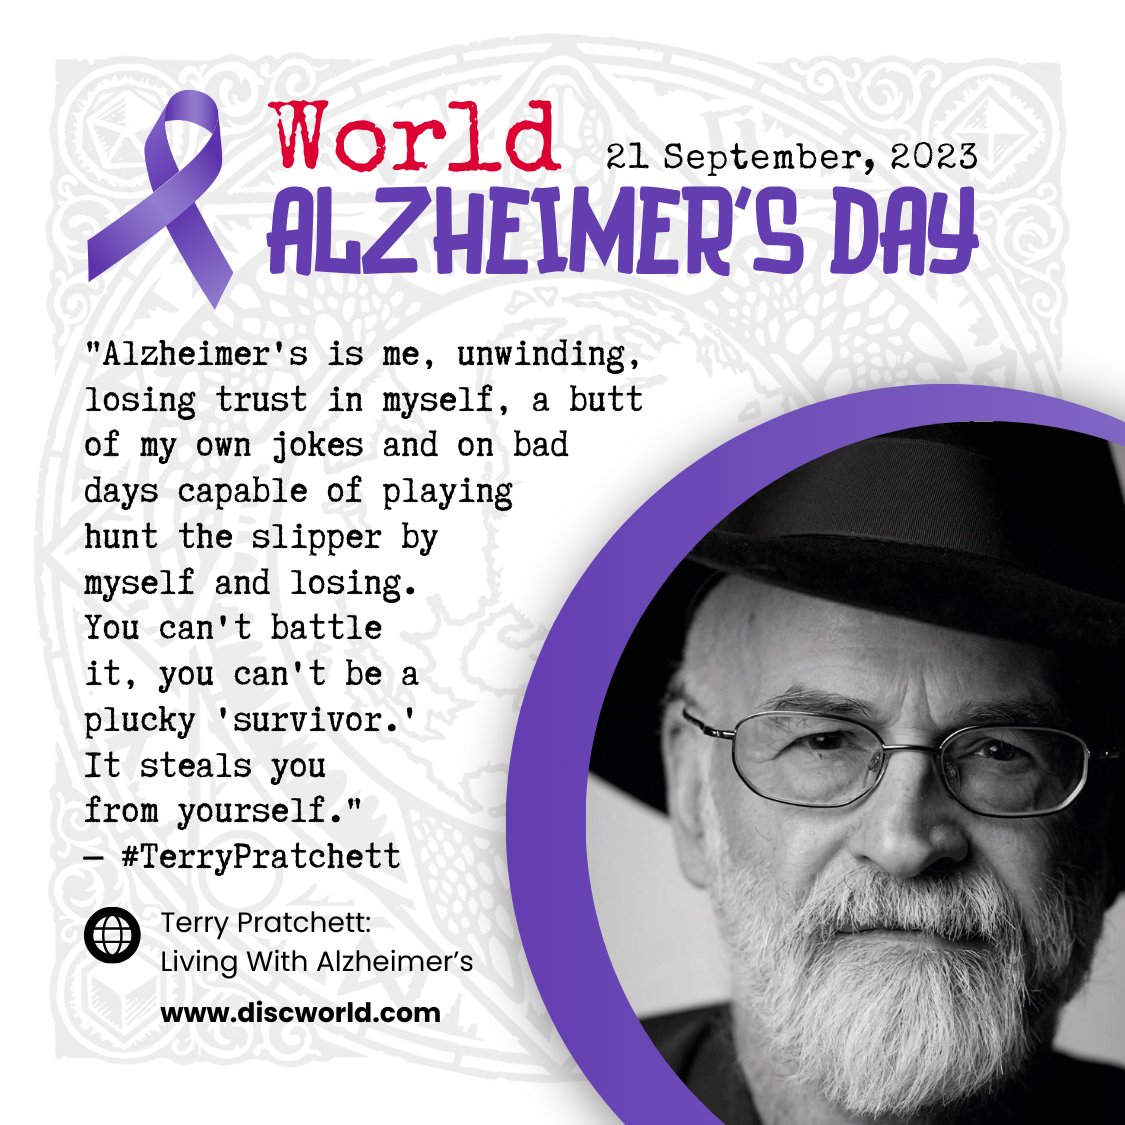 'Alzheimer's is me, unwinding, losing trust in myself, a butt of my own jokes and on bad days capable of playing hunt the slipper by myself and losing. You can't battle it, you can't be a plucky 'survivor.' It steals you from yourself.' — #terrypratchett bit.ly/Living-With-Al…